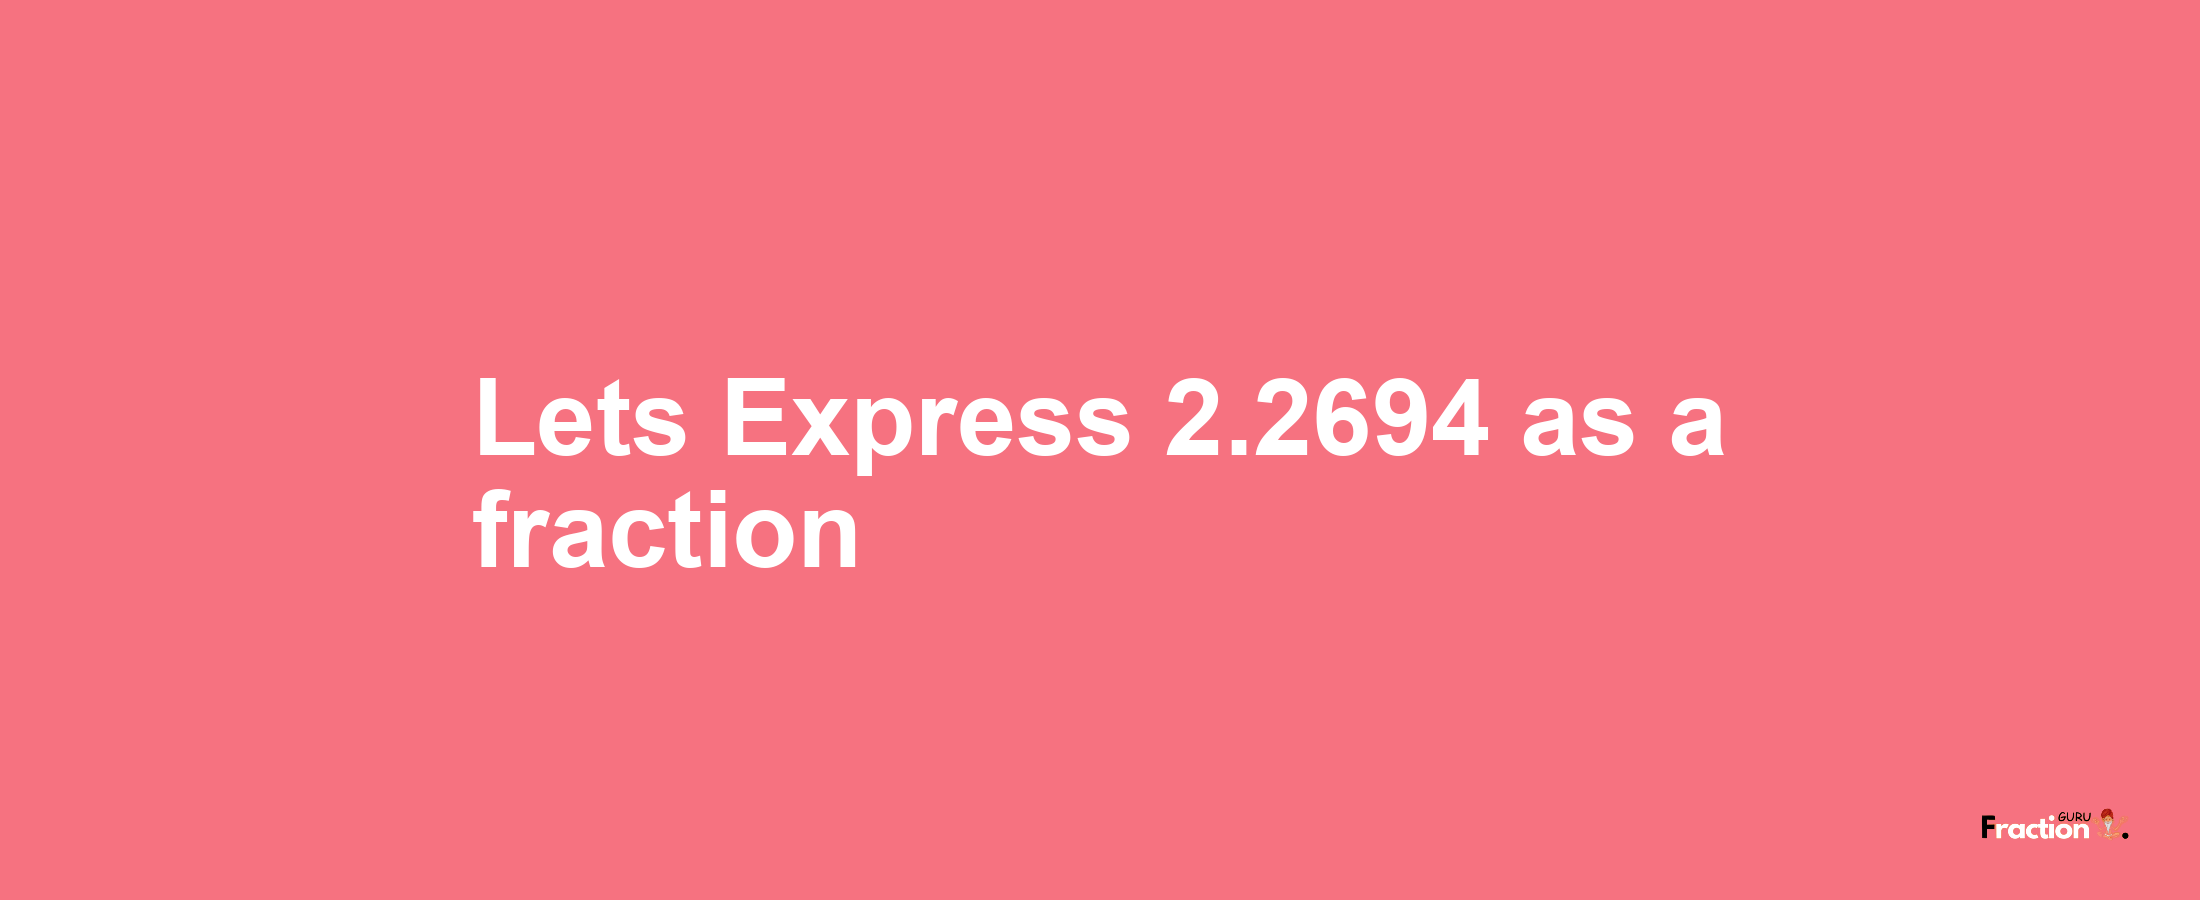 Lets Express 2.2694 as afraction